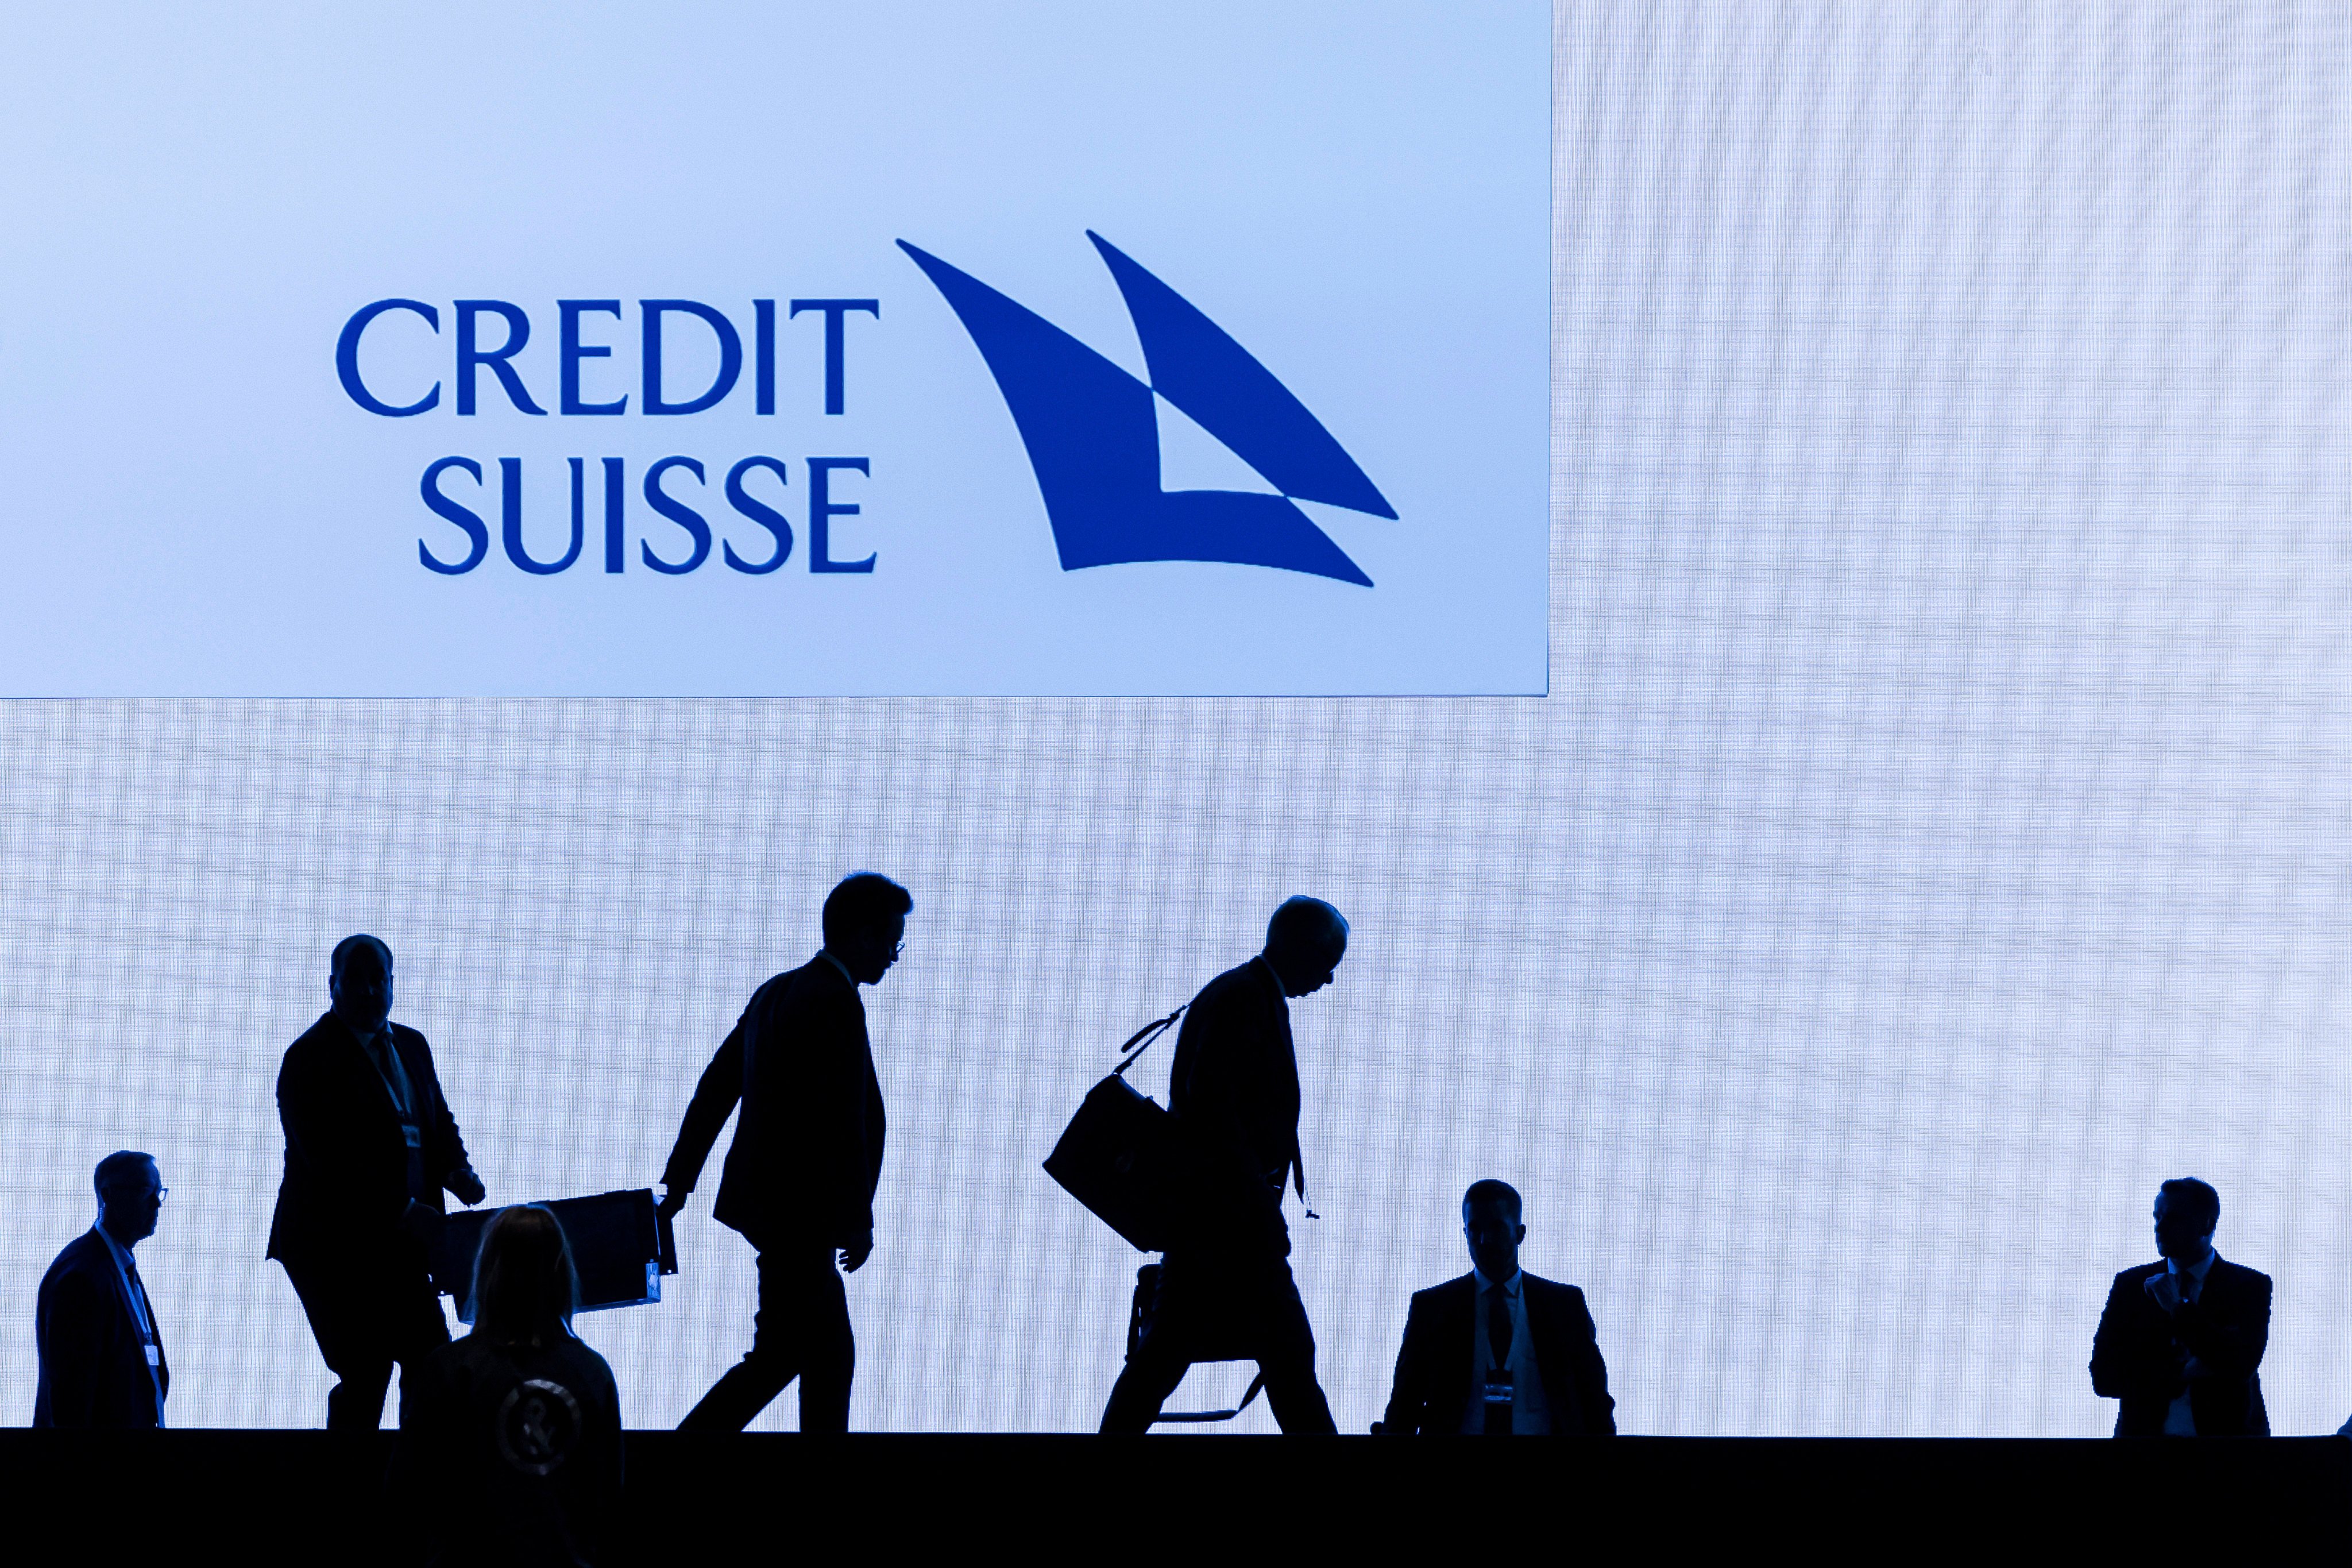 Singapore’s banking regulator has fined Credit Suisse US$3 million due to bankers’ misconduct. Photo: AP